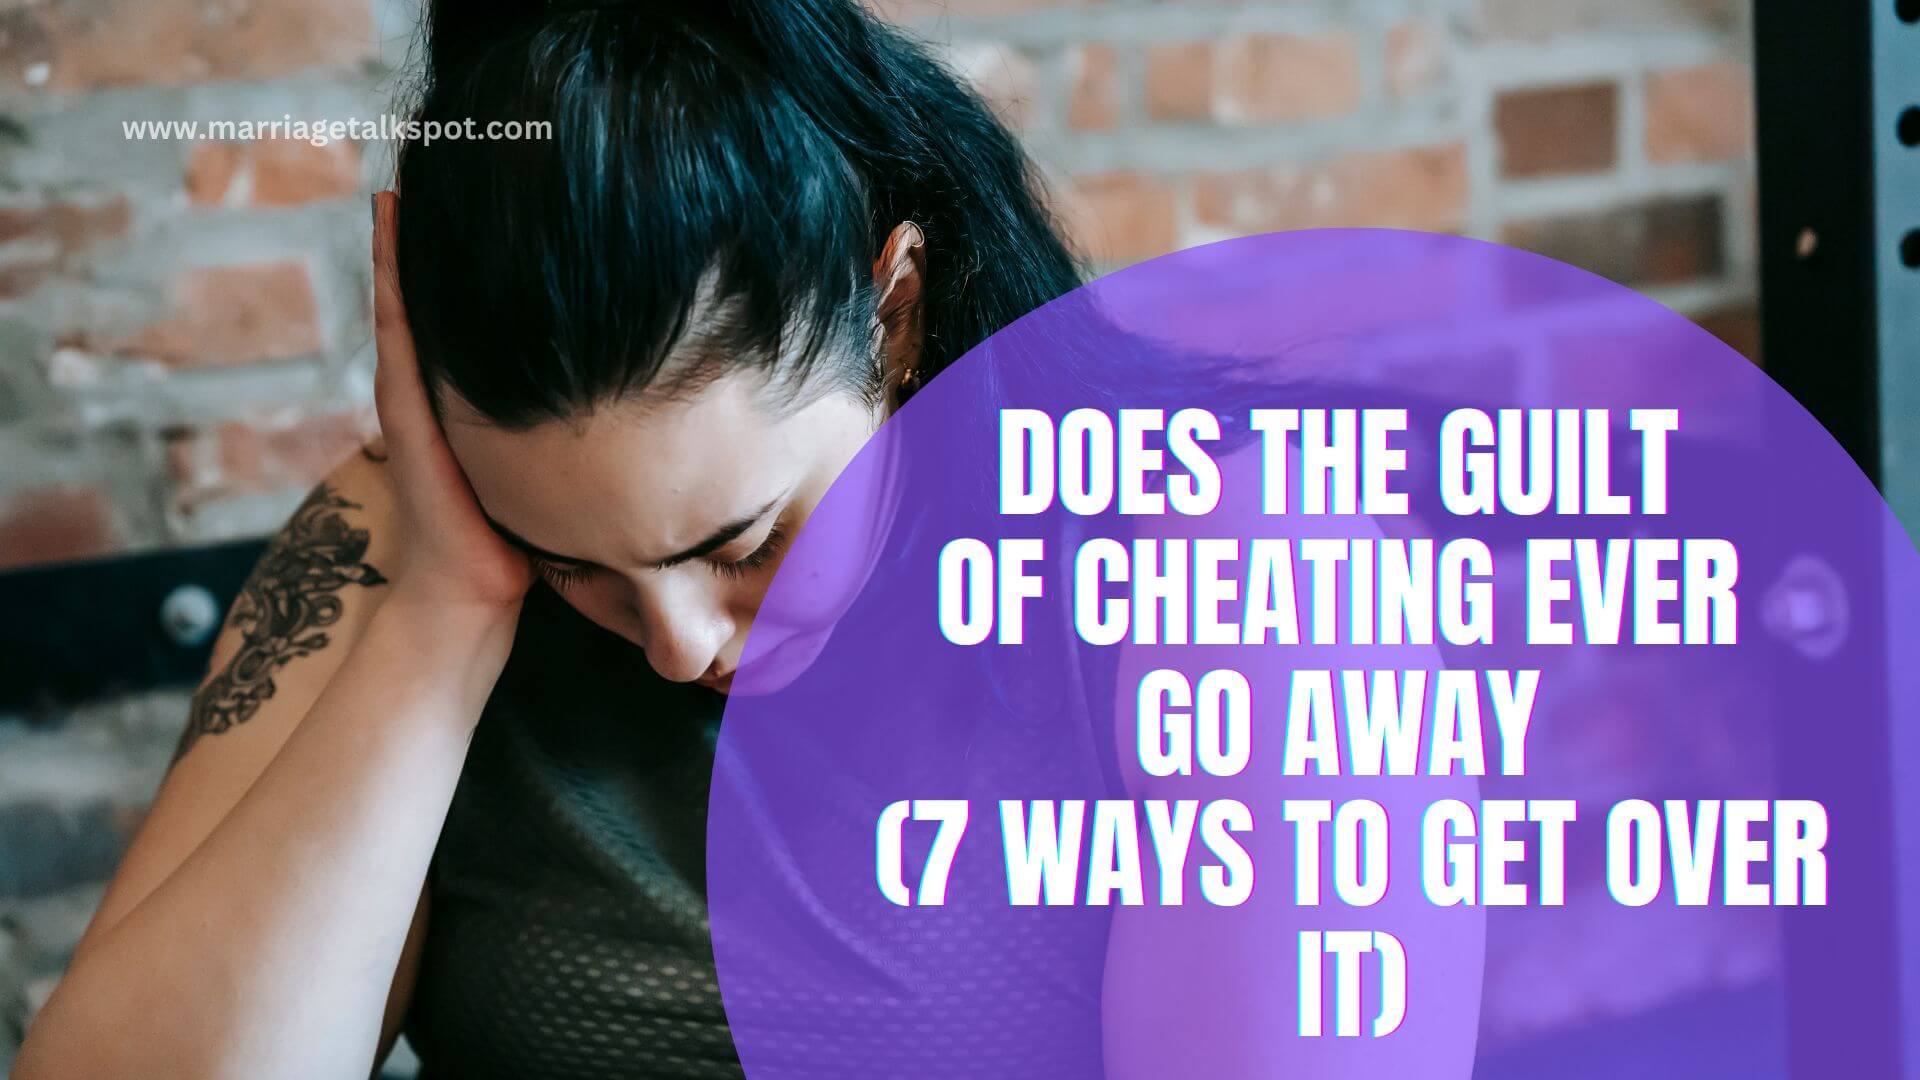 DOES THE GUILT OF CHEATING EVER GO AWAY (7 WAYS TO GET OVER IT)